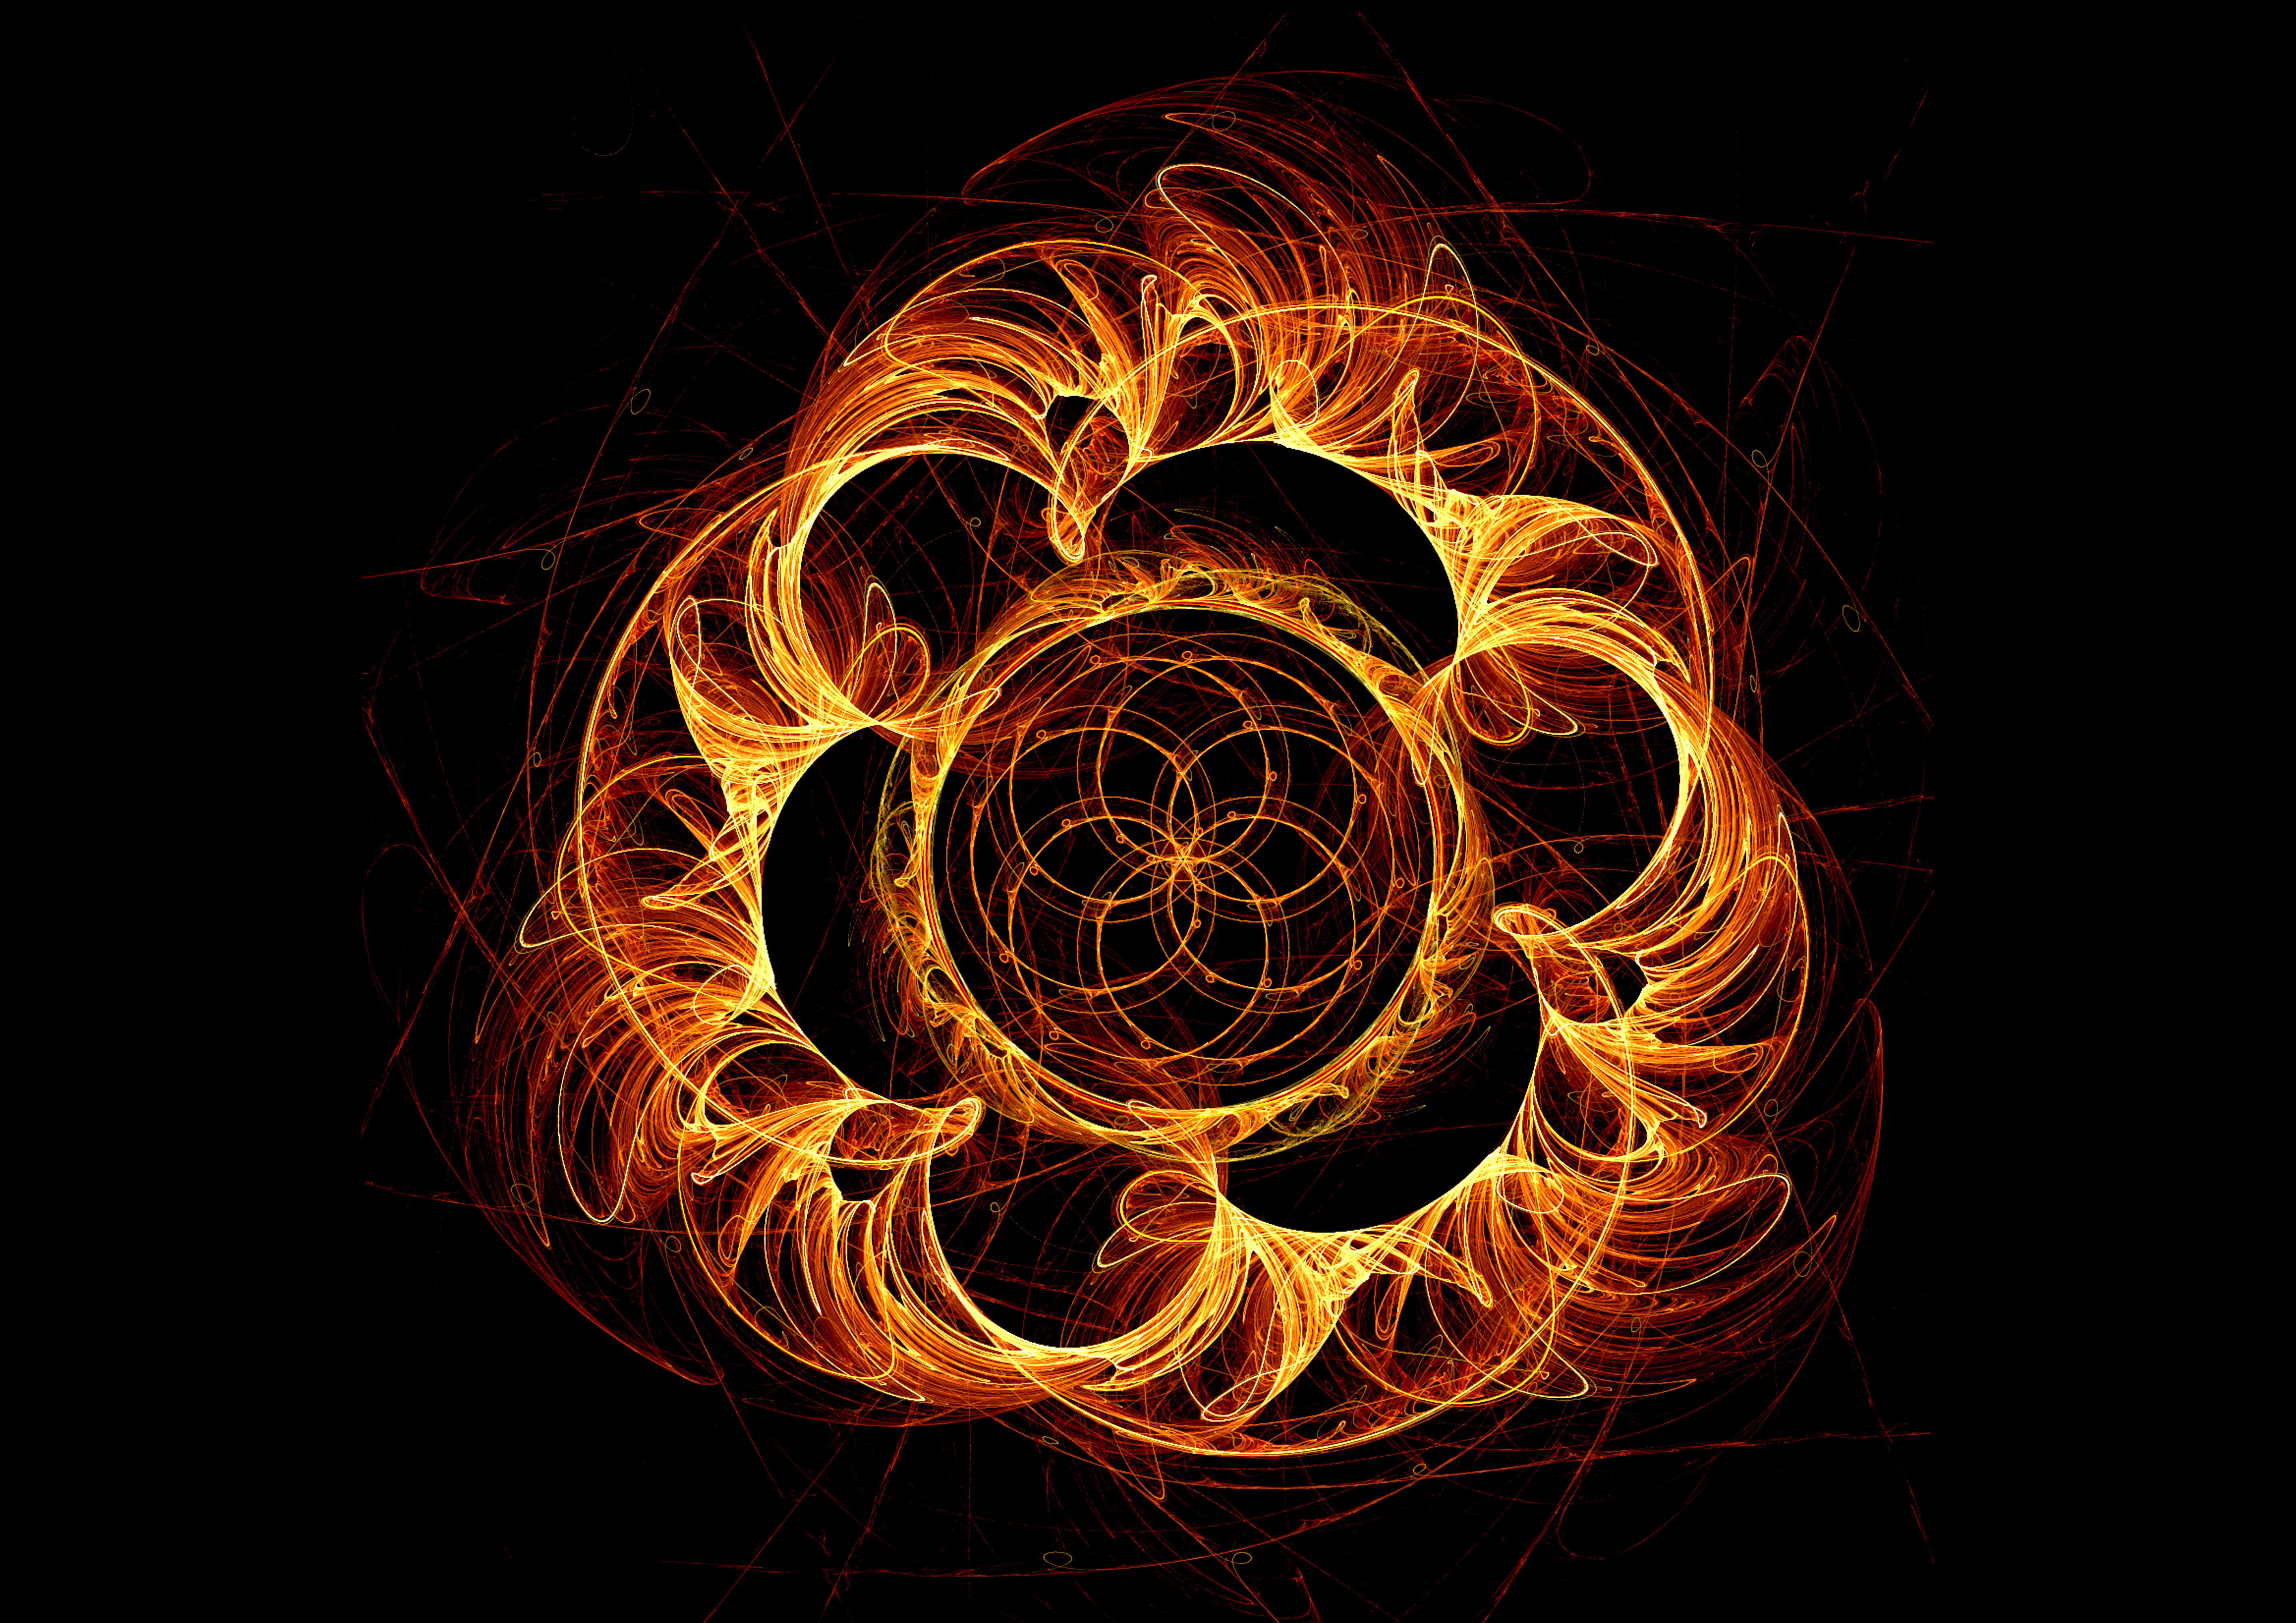 Windows Backgrounds abstract, bright, fractal, confused, intricate, flaming, swirling, involute, fiery